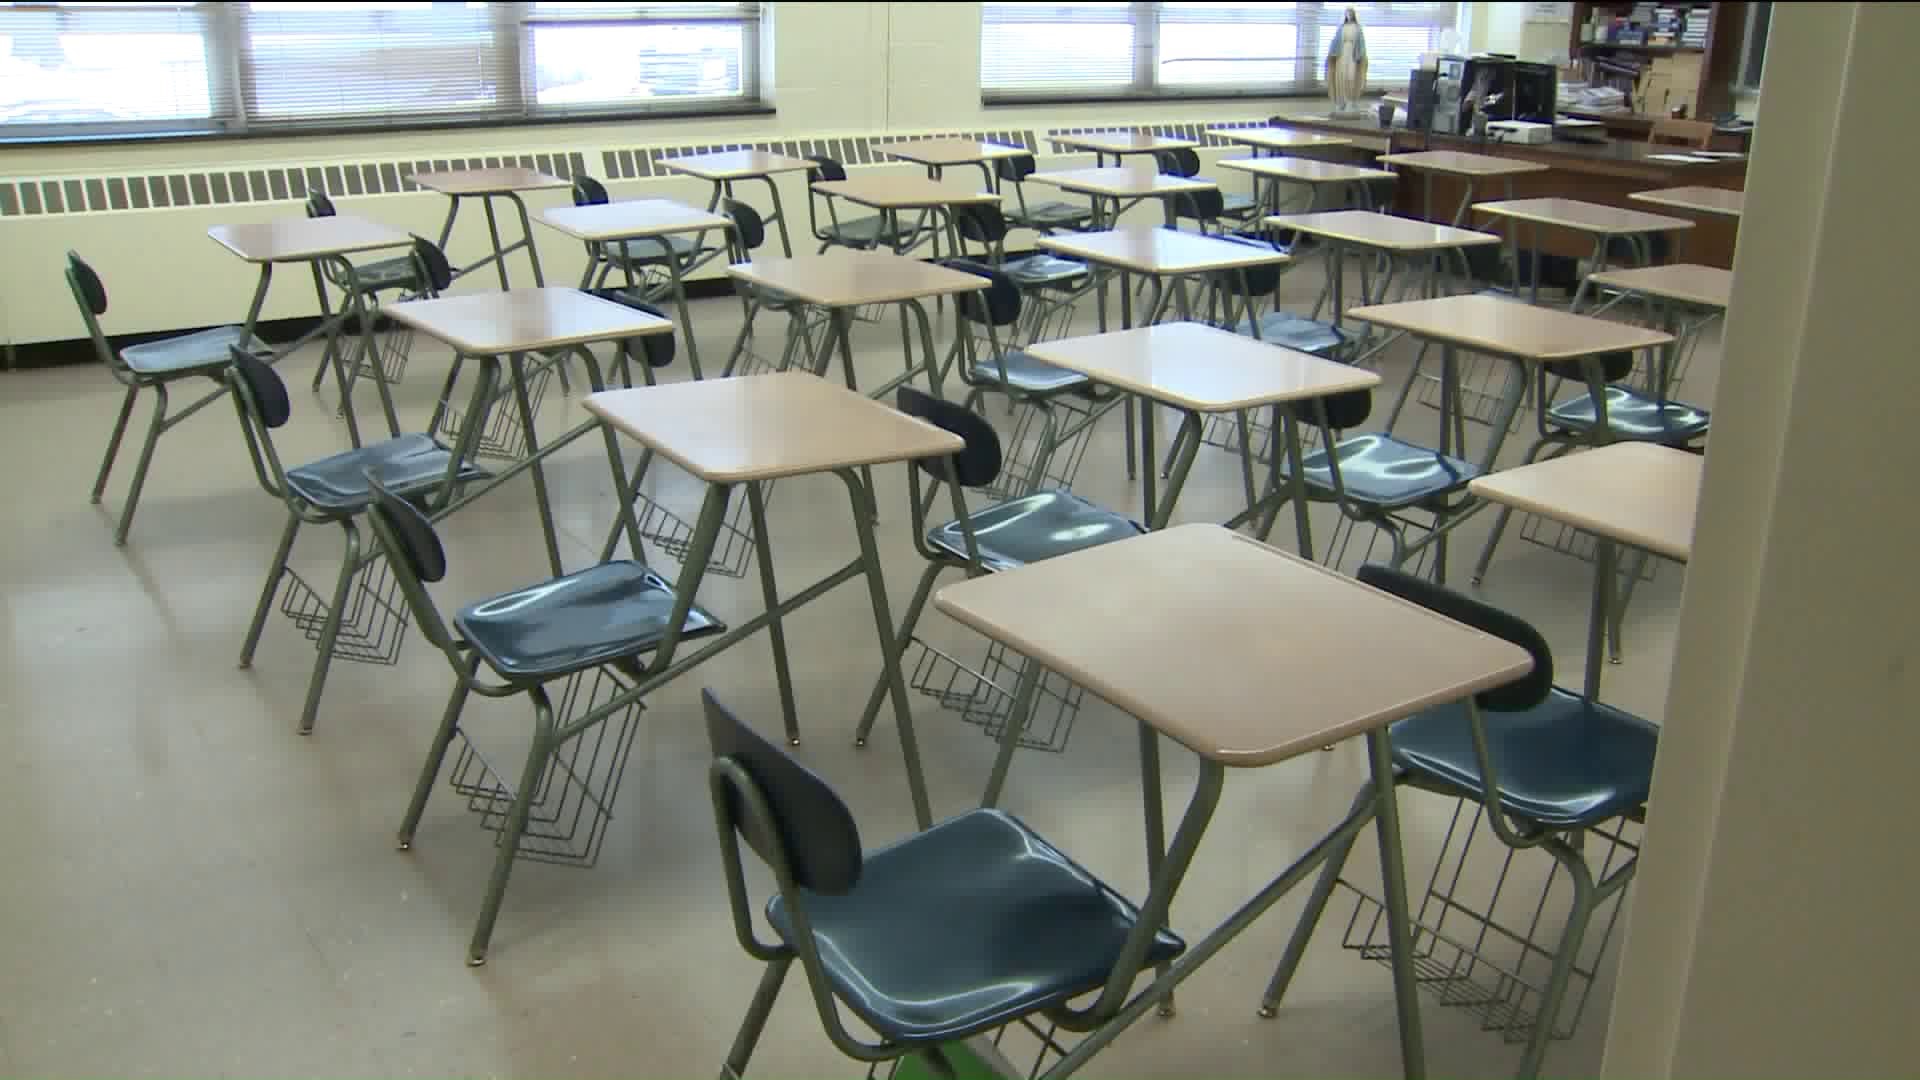 State budget woes impact schools